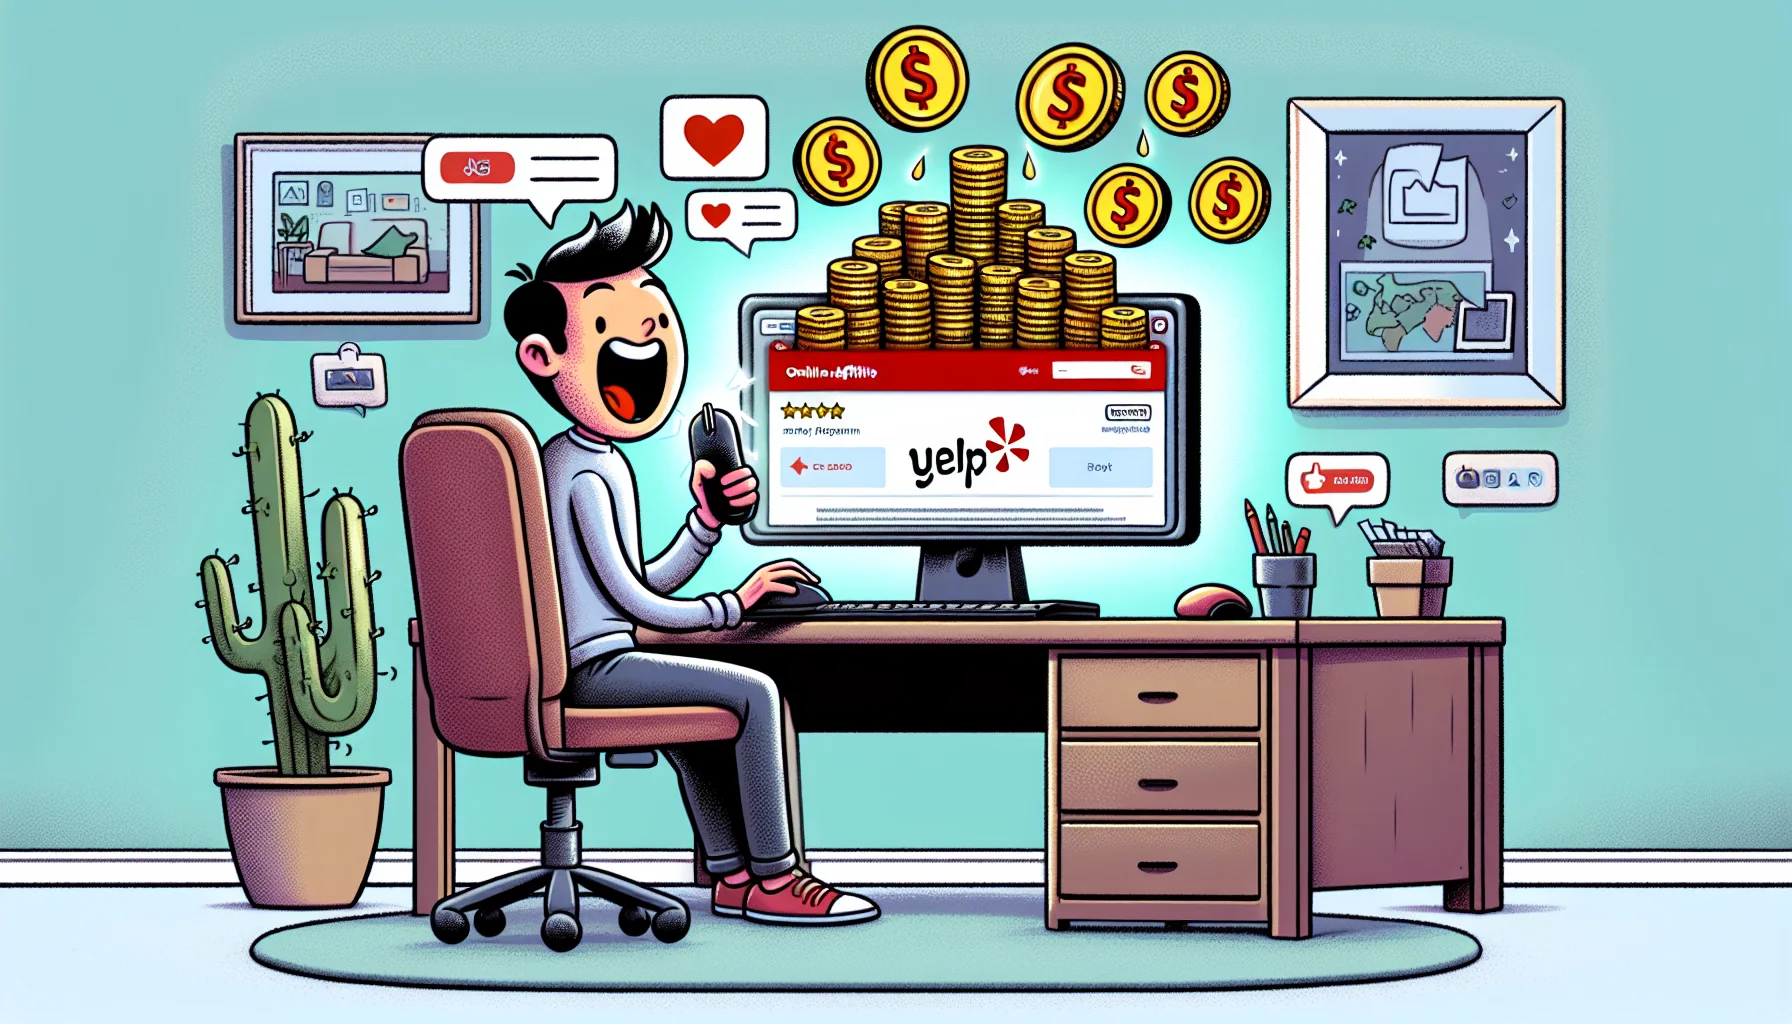 Draw a humorous yet realistic scene focusing on an online affiliate program, specifically related to Yelp. Include a character sitting at a computer in a home office setup. The computer screen should display Yelp's logo and hints of its interface. Stacks of virtual coins should be pouring from the screen, symbolising online financial gains. Include relevant icons suggesting online marketing and social media in the background. The character should be holding a mouse in one hand with a big excited smile on their face, emphasizing the easy and enjoyable way of making money online.